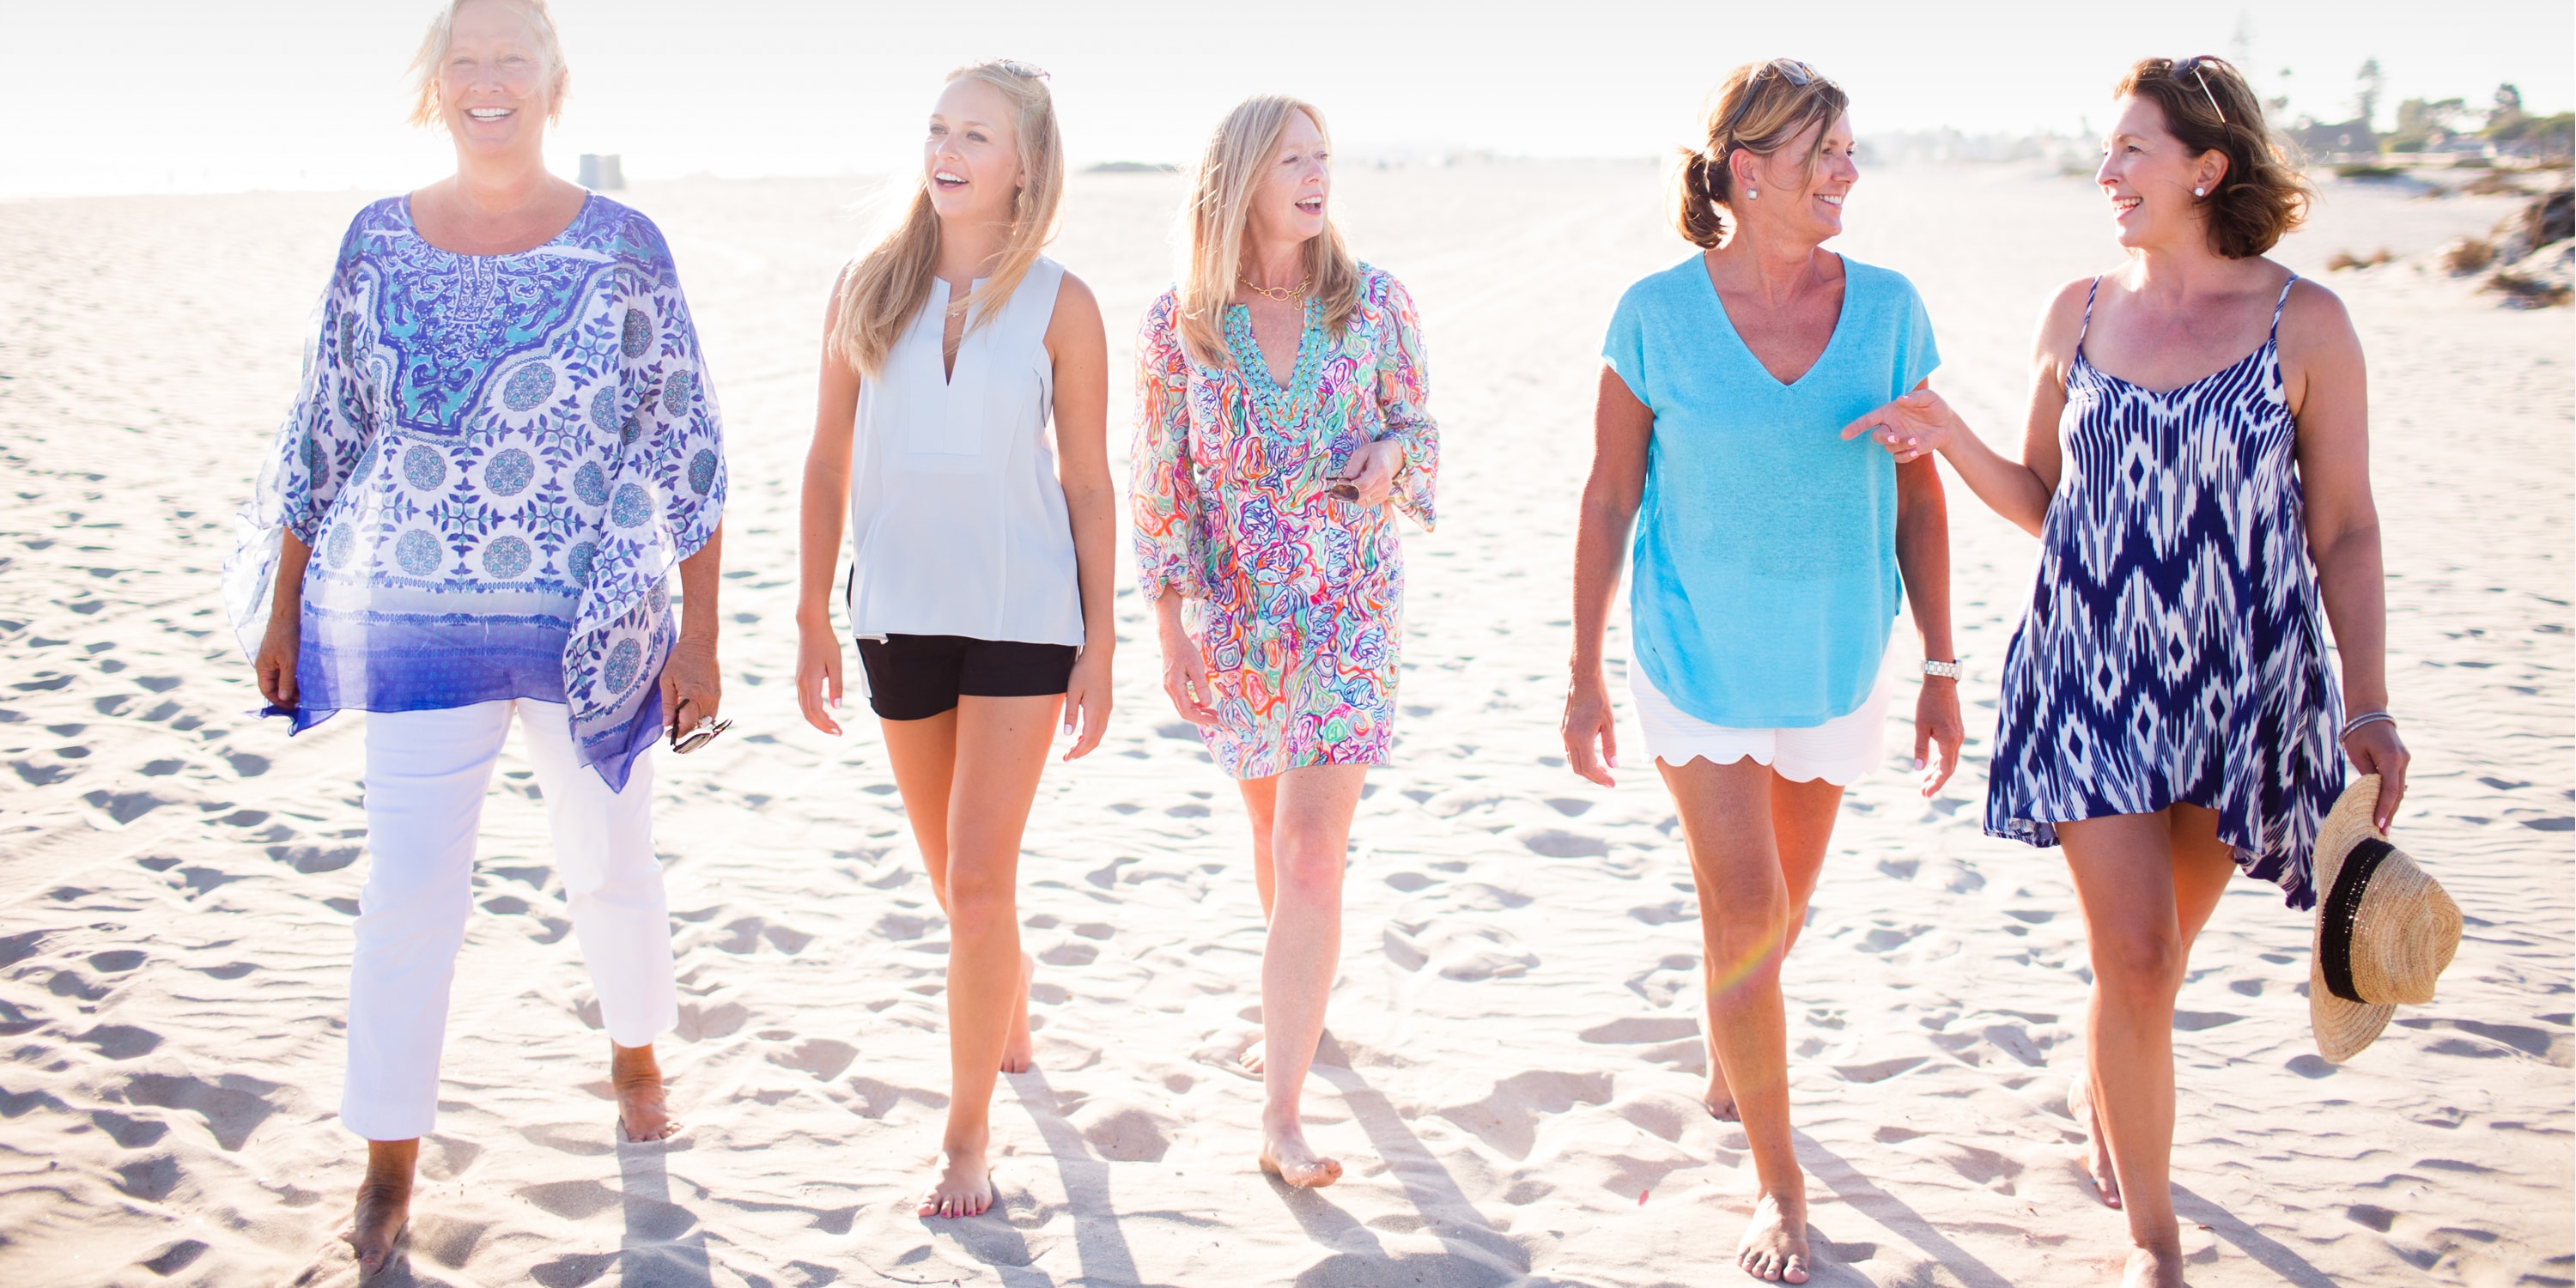 At WealthChoice, female lawyers experience top notch financial planning, so they can enjoy more time on the beach.